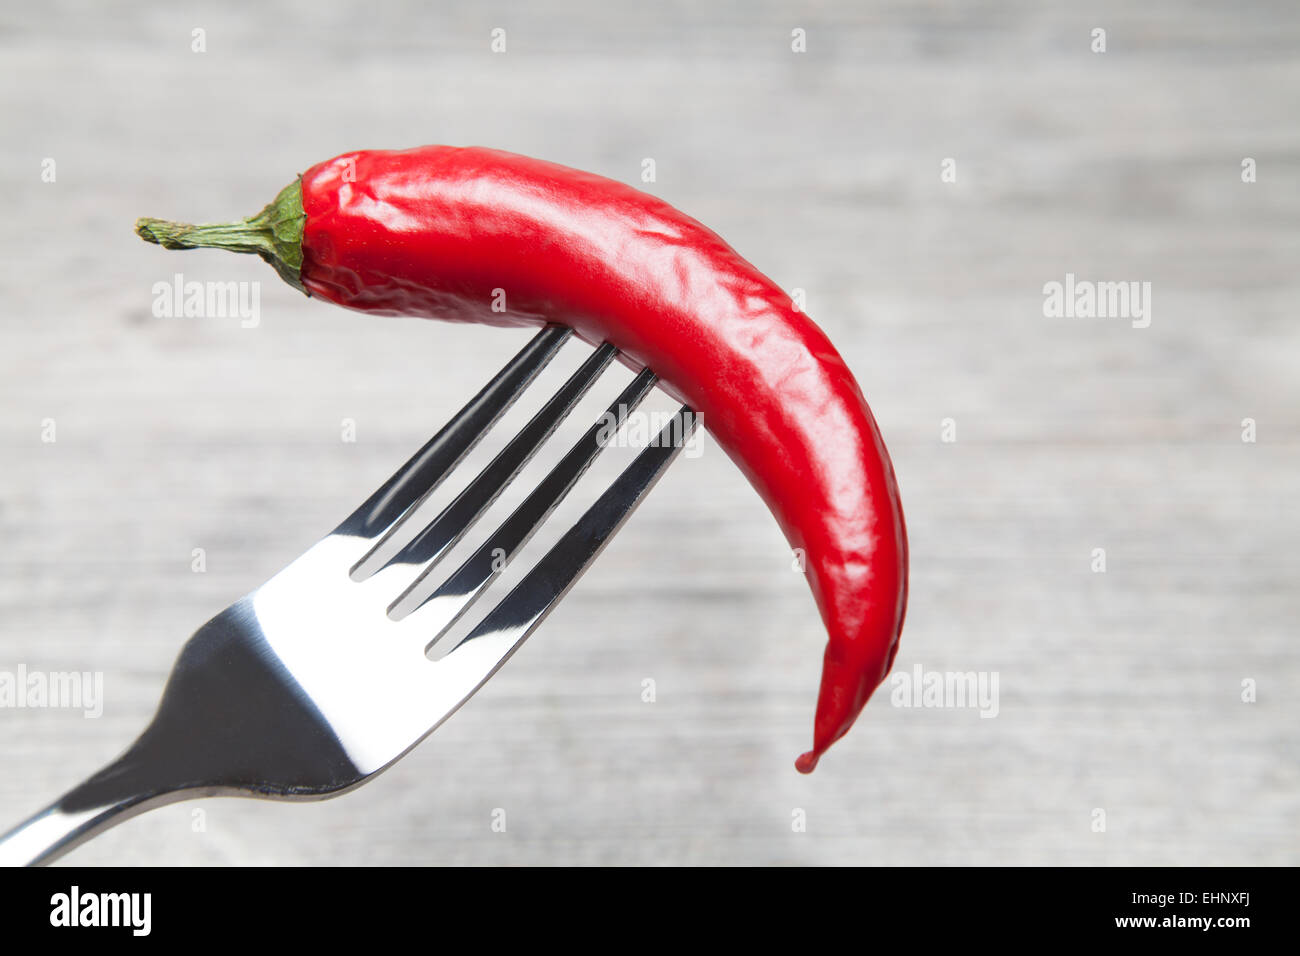 peperoni impaled with a fork Stock Photo